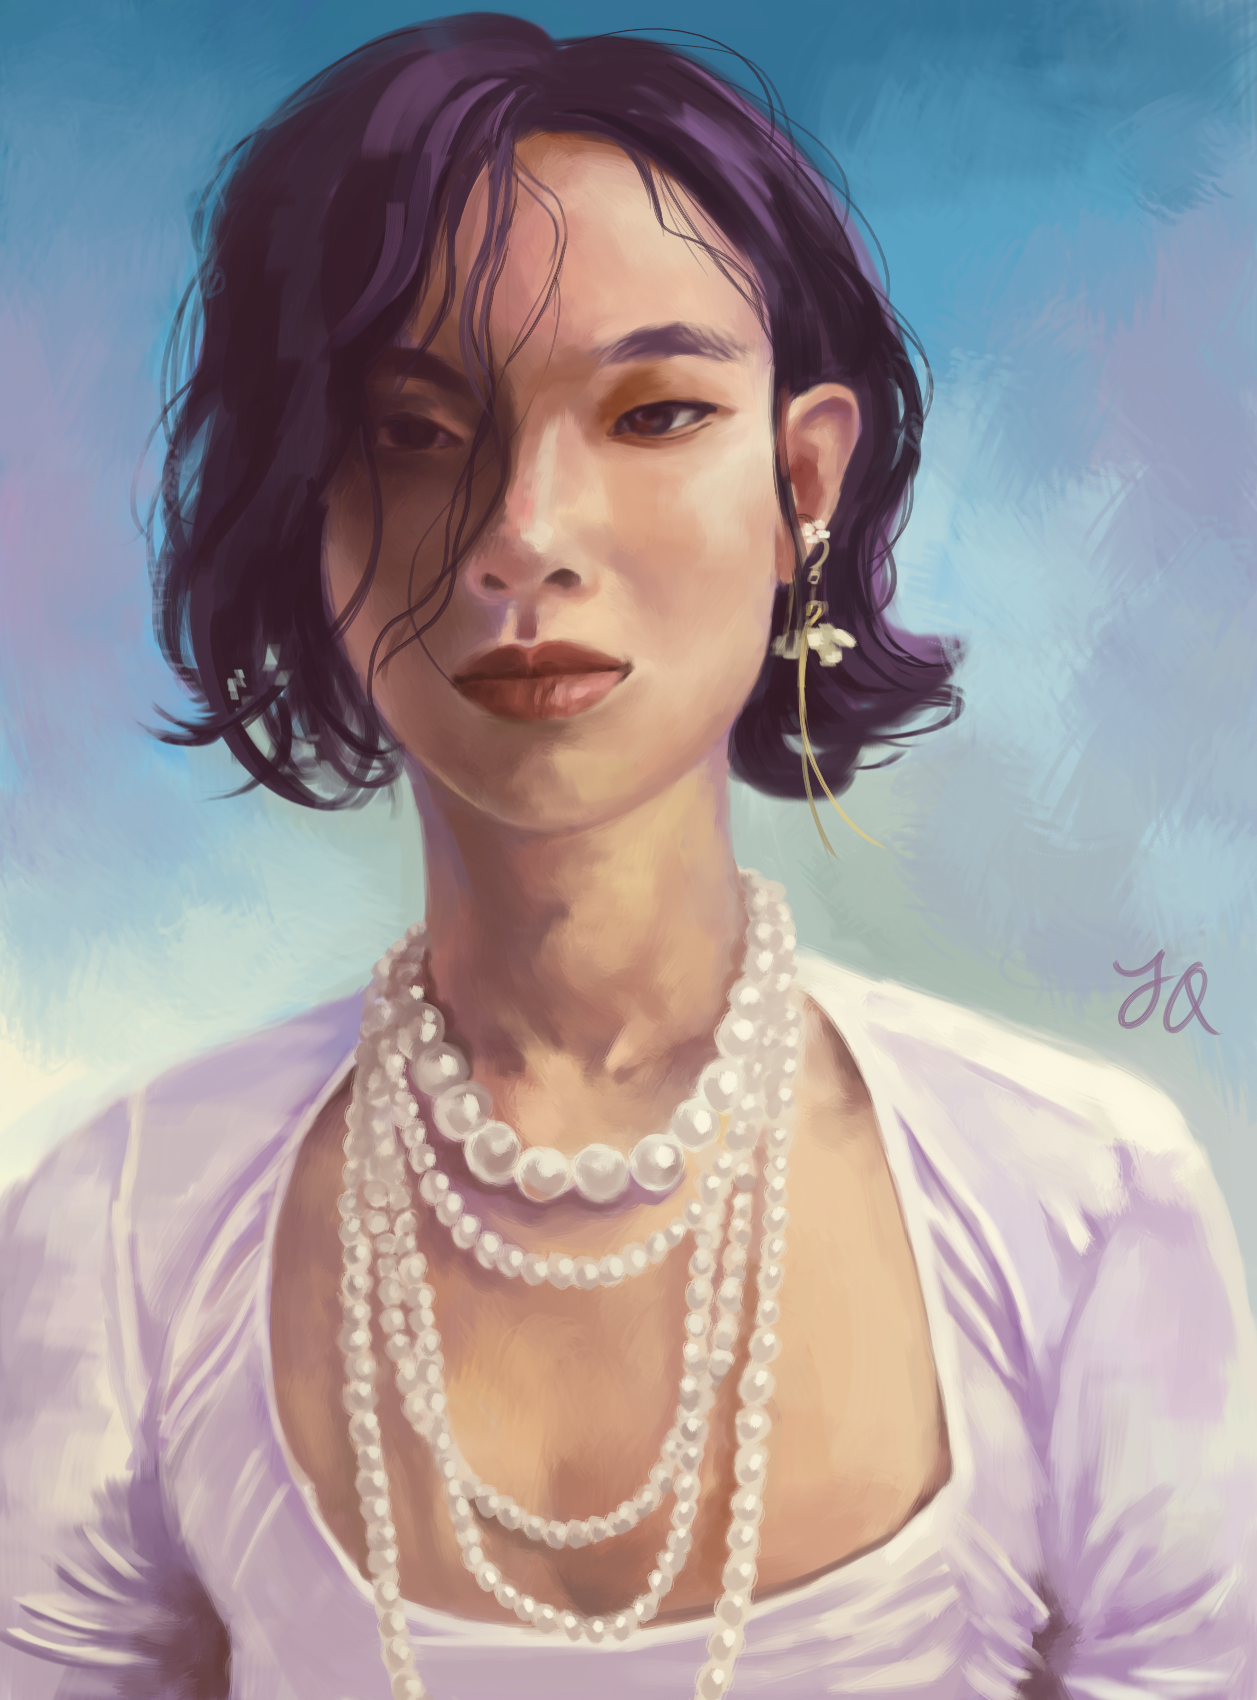 A digital painting photo study of a person with short, slightly curly hair, head facing the camera and angled slightly to their right. The right half of their head is in shadow and slightly obscured by bangs. They are wearing a long earring on their left ear and a multi-layered pearl necklace over a white shirt.